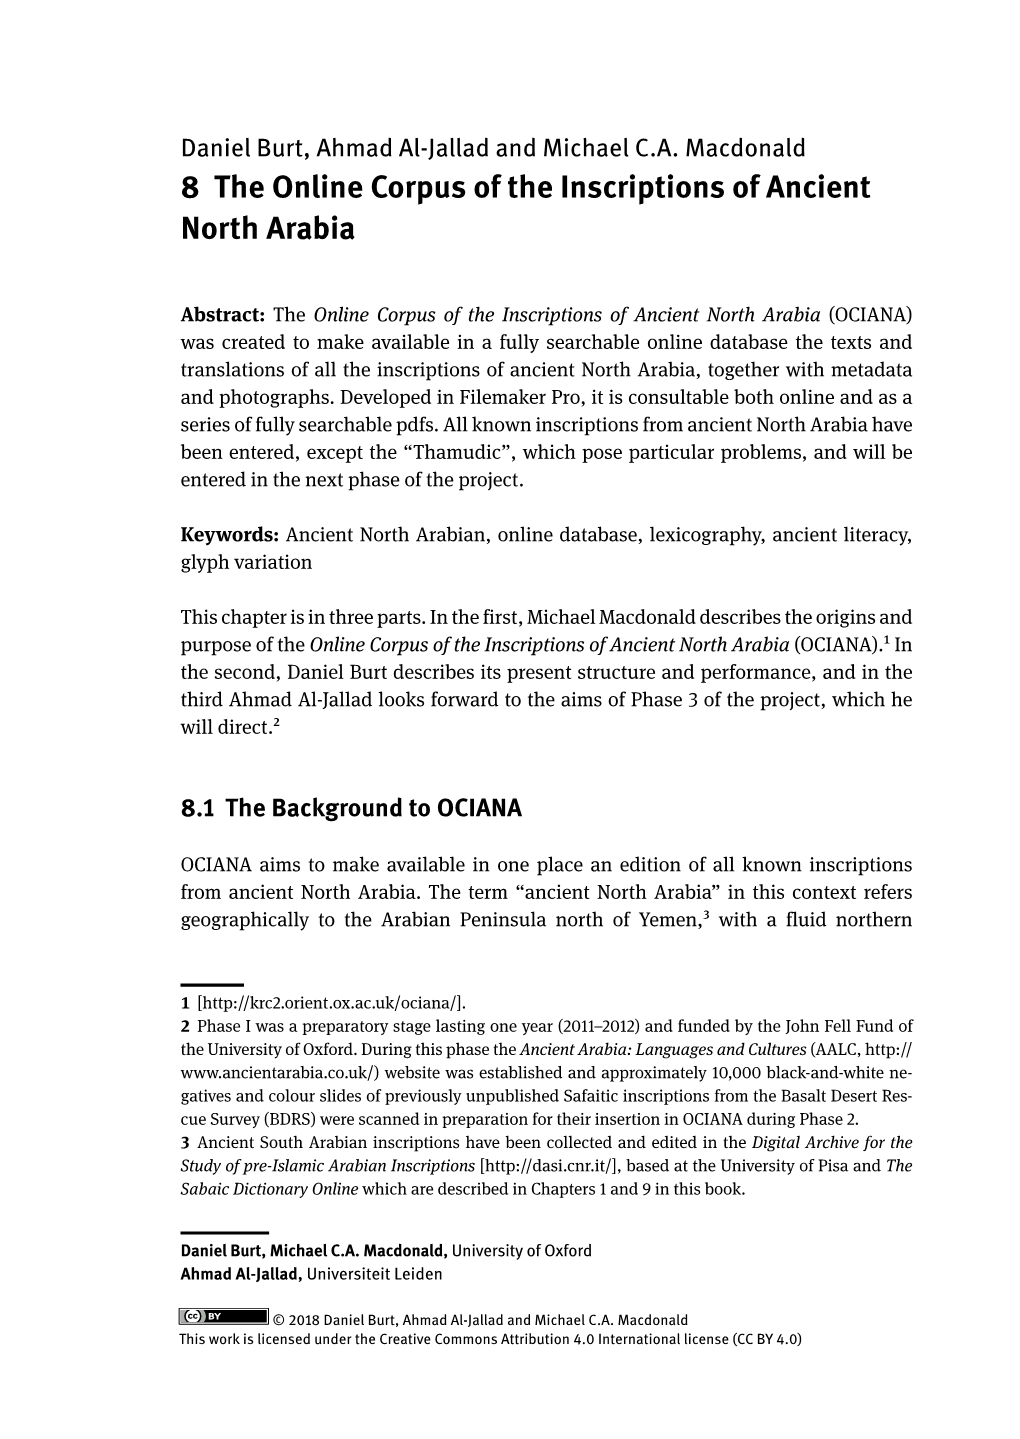 8 the Online Corpus of the Inscriptions of Ancient North Arabia